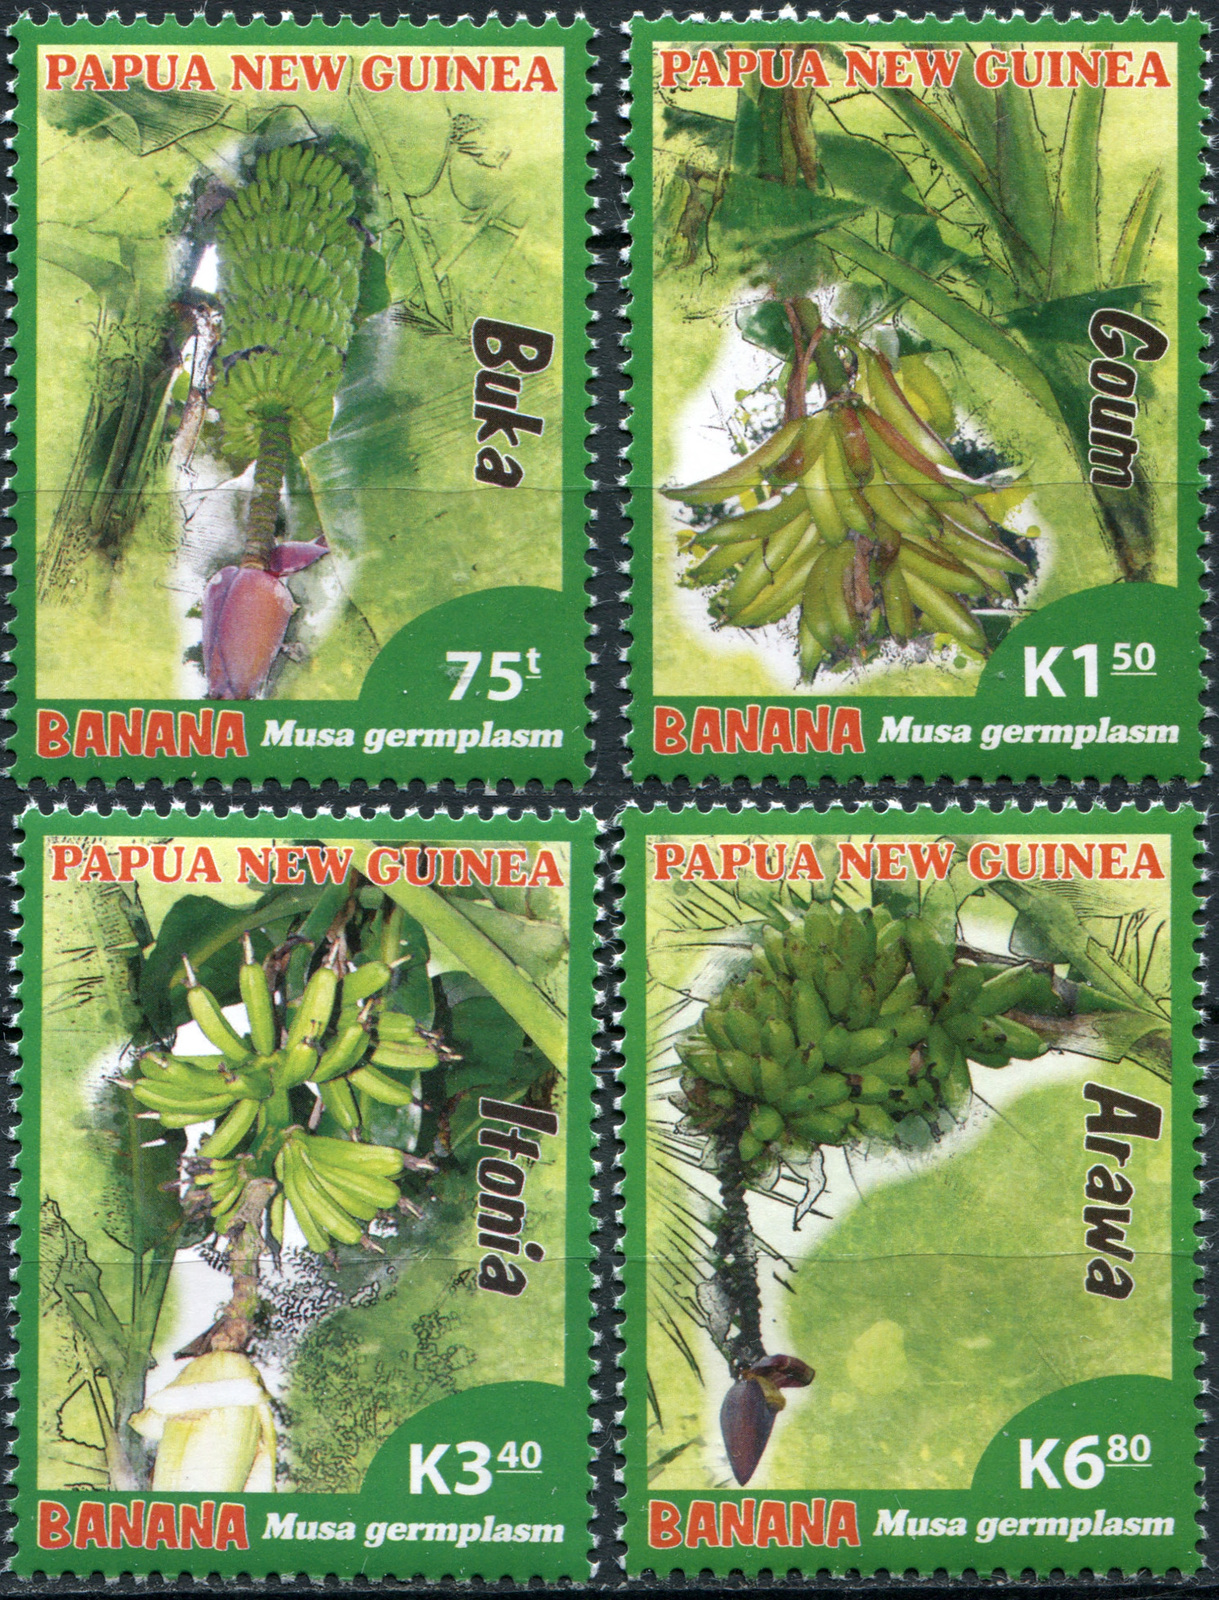 Primary image for Papua New Guinea. 2017. Native Banana Species (MNH OG) Set of 4 stamps